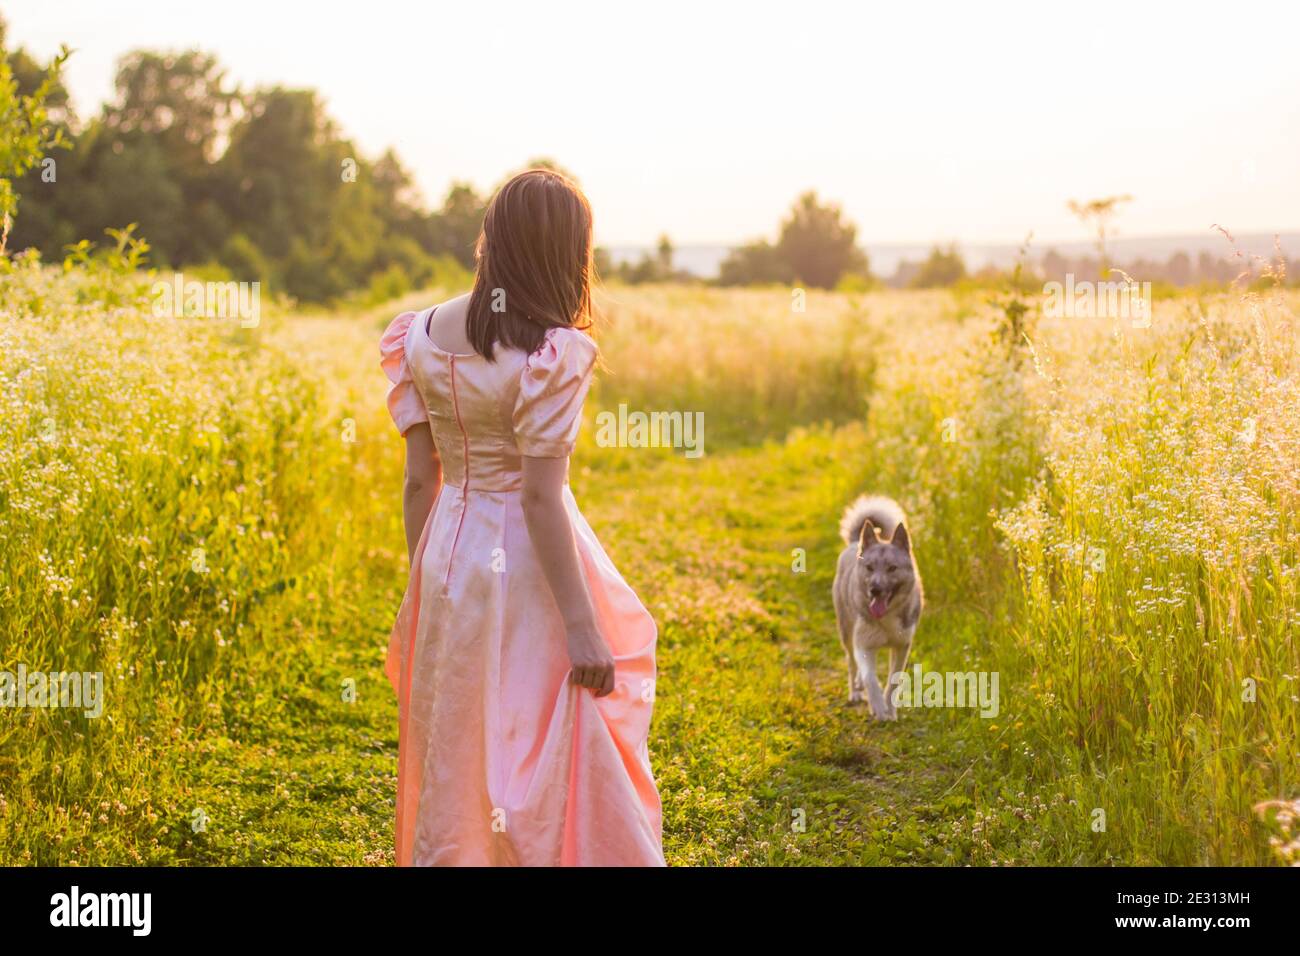 girl standing in the field in a pink dress Stock Photo